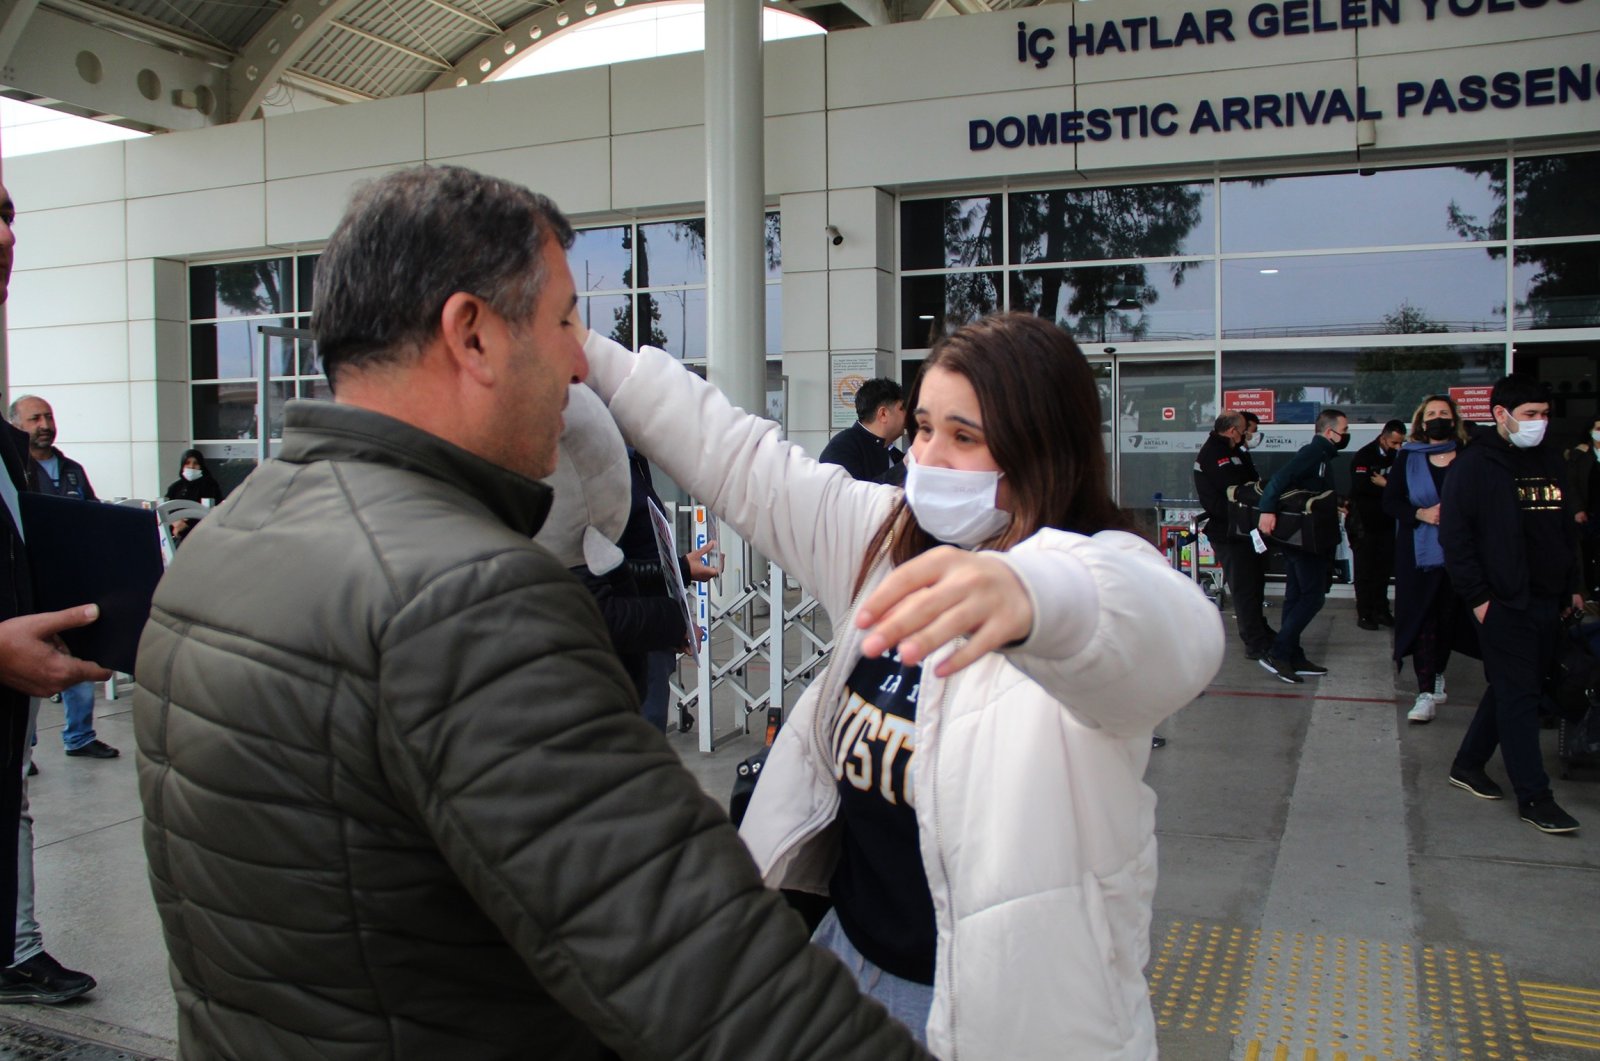 Turkish university student Buse Develi meets with her father in Antalya airport, Turkey, March 7, 2022. (IHA Photo)